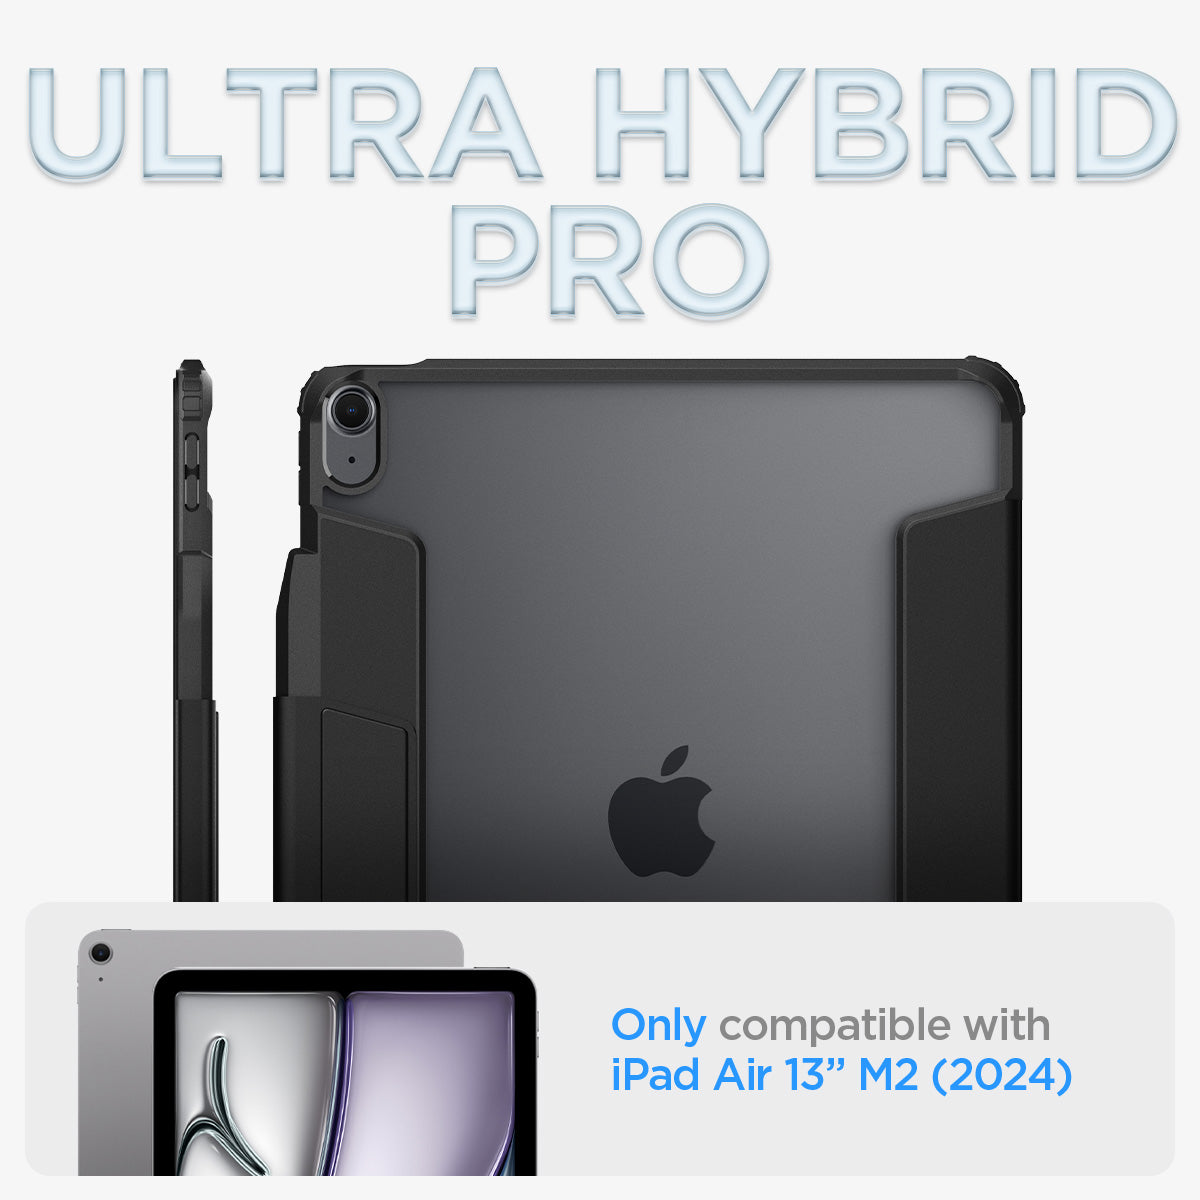 ACS07668 - Ultra Hybrid Pro. Only compatible with iPad Air 13" M2 (2024)